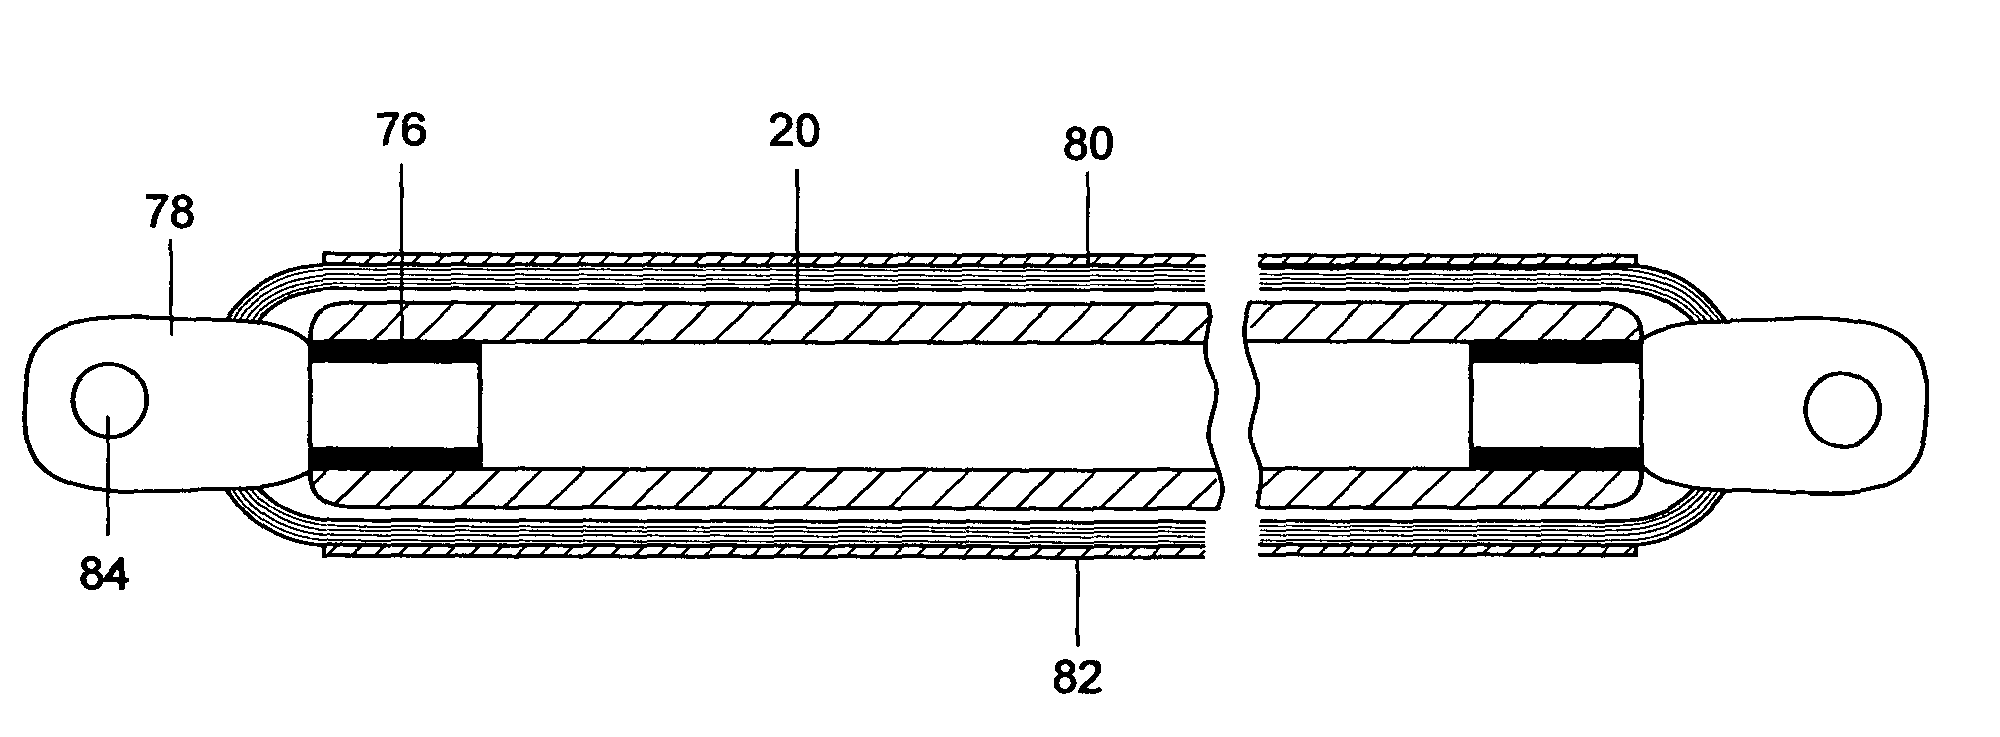 Reinforced tension and compression reacting strut and method of making same